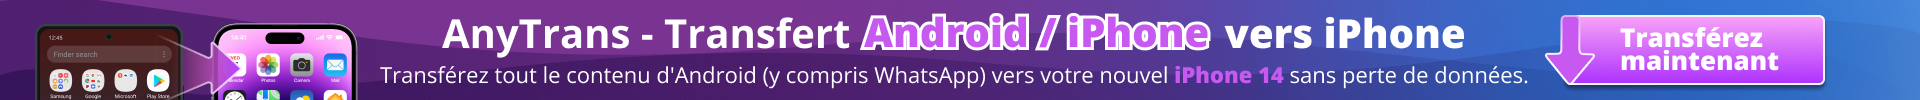 AnyTrans - Transfert Android/iPhone vers iPhone